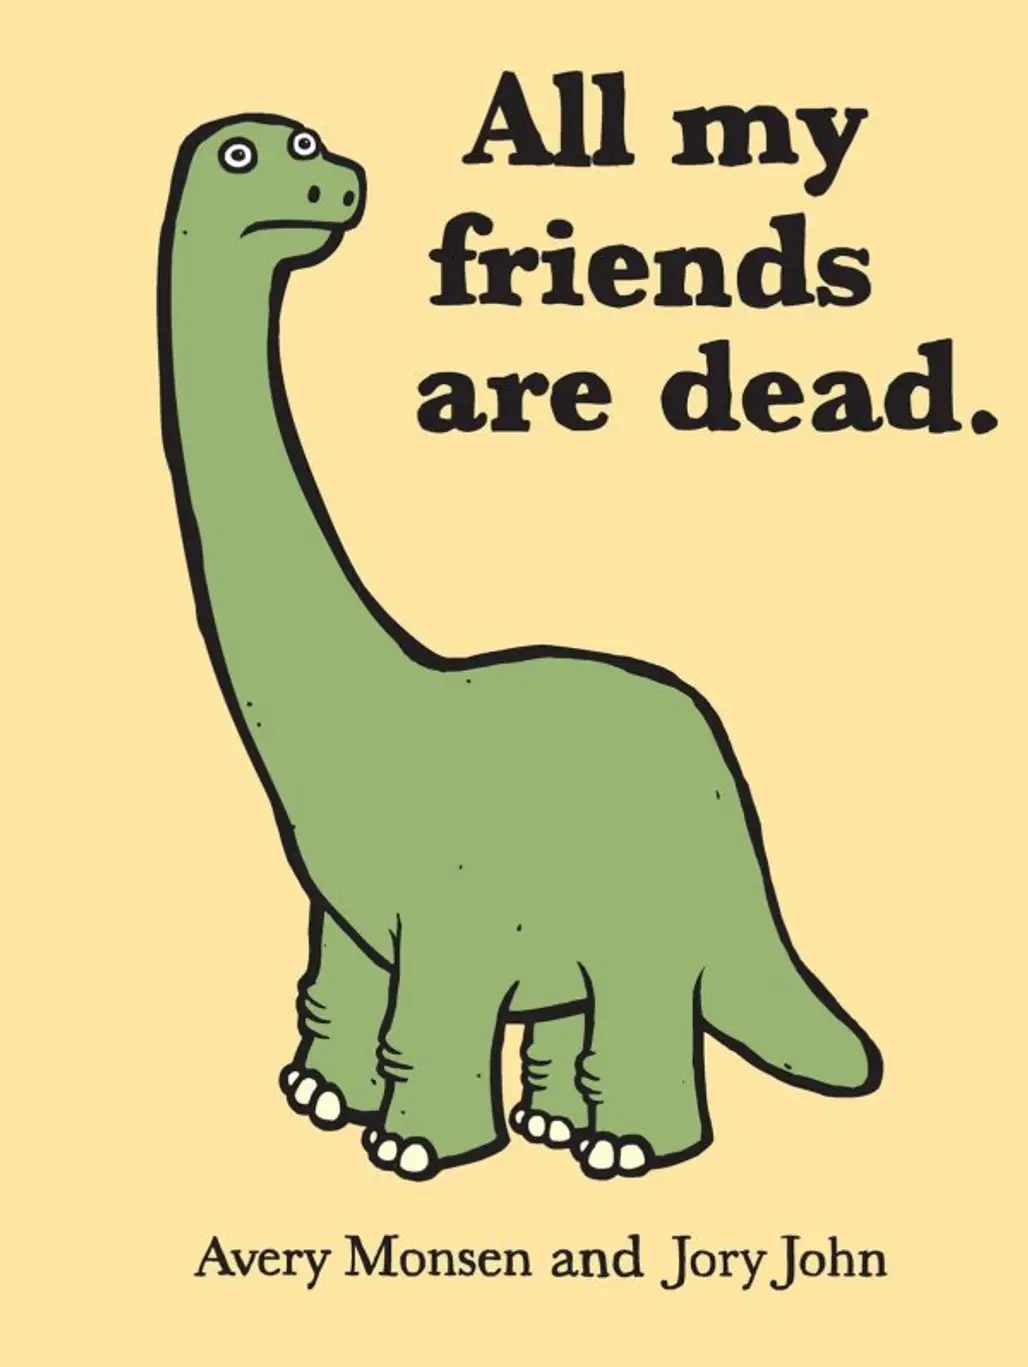 All My Friends Are Dead by Avery Monsen and Jory John